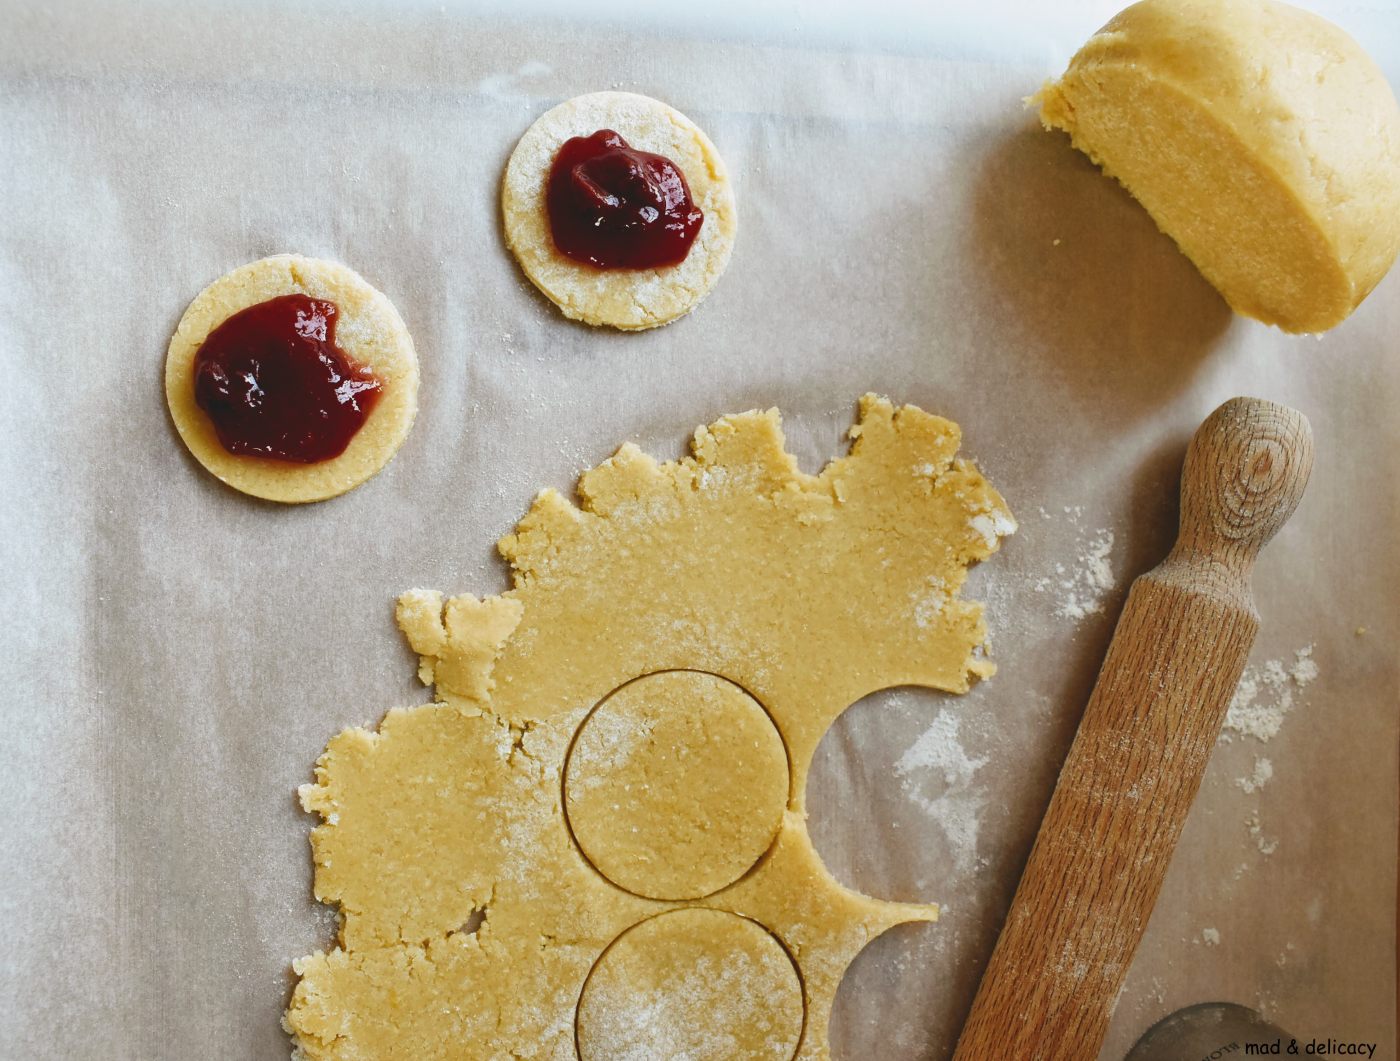 Friable and One-leads-to-another Jam Stuffed Biscuits